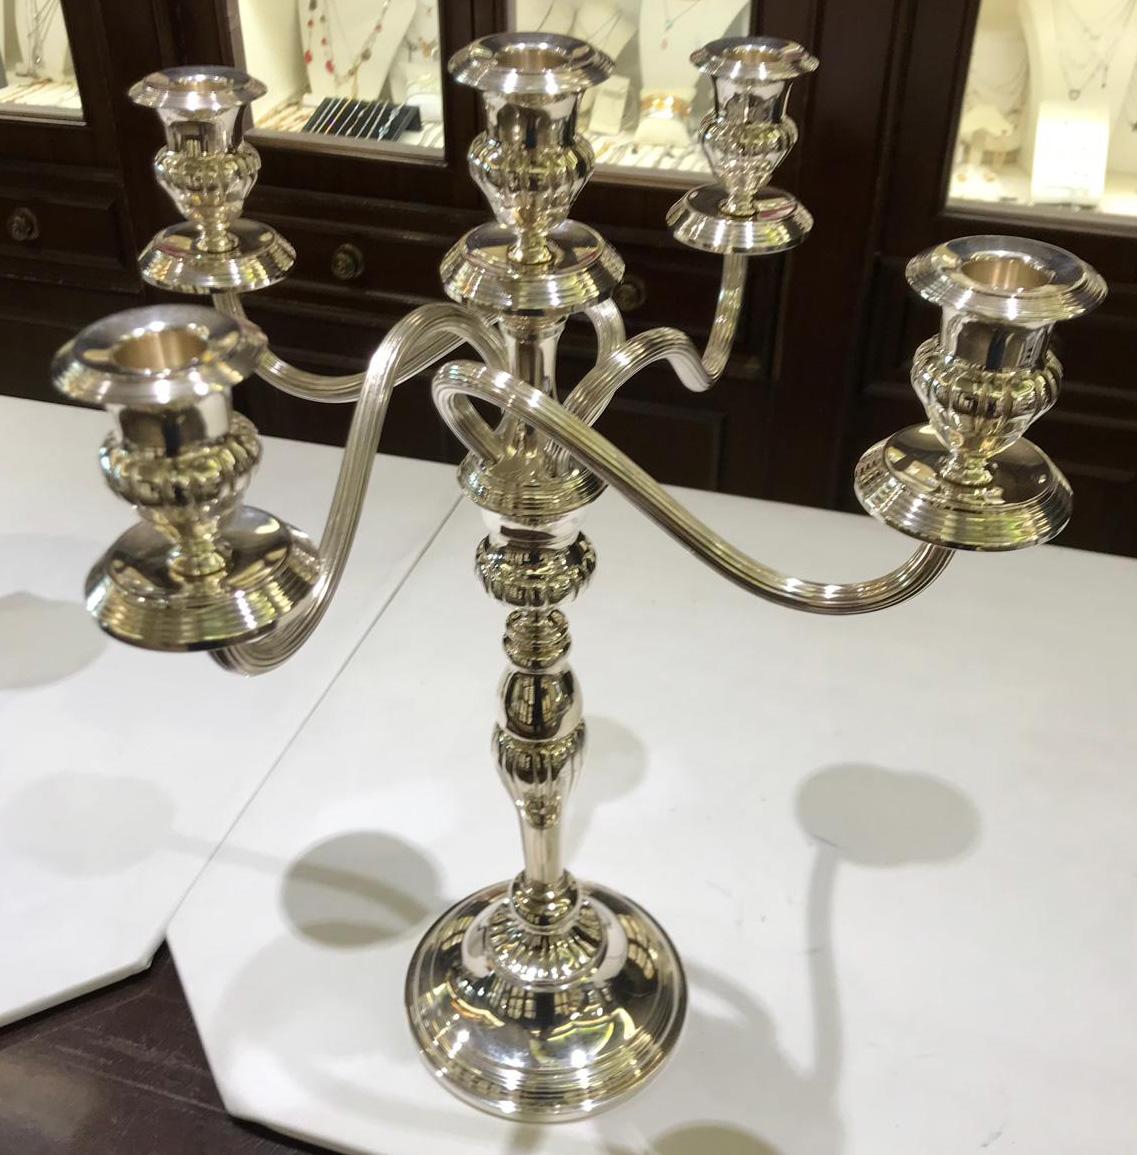 20th cent. Sterling Silver Empire Candelabra, 1400 gr.
A stunningly beautiful five-light candelabra, round base and stem with ribs
Height cm 49
Diameter cm 37